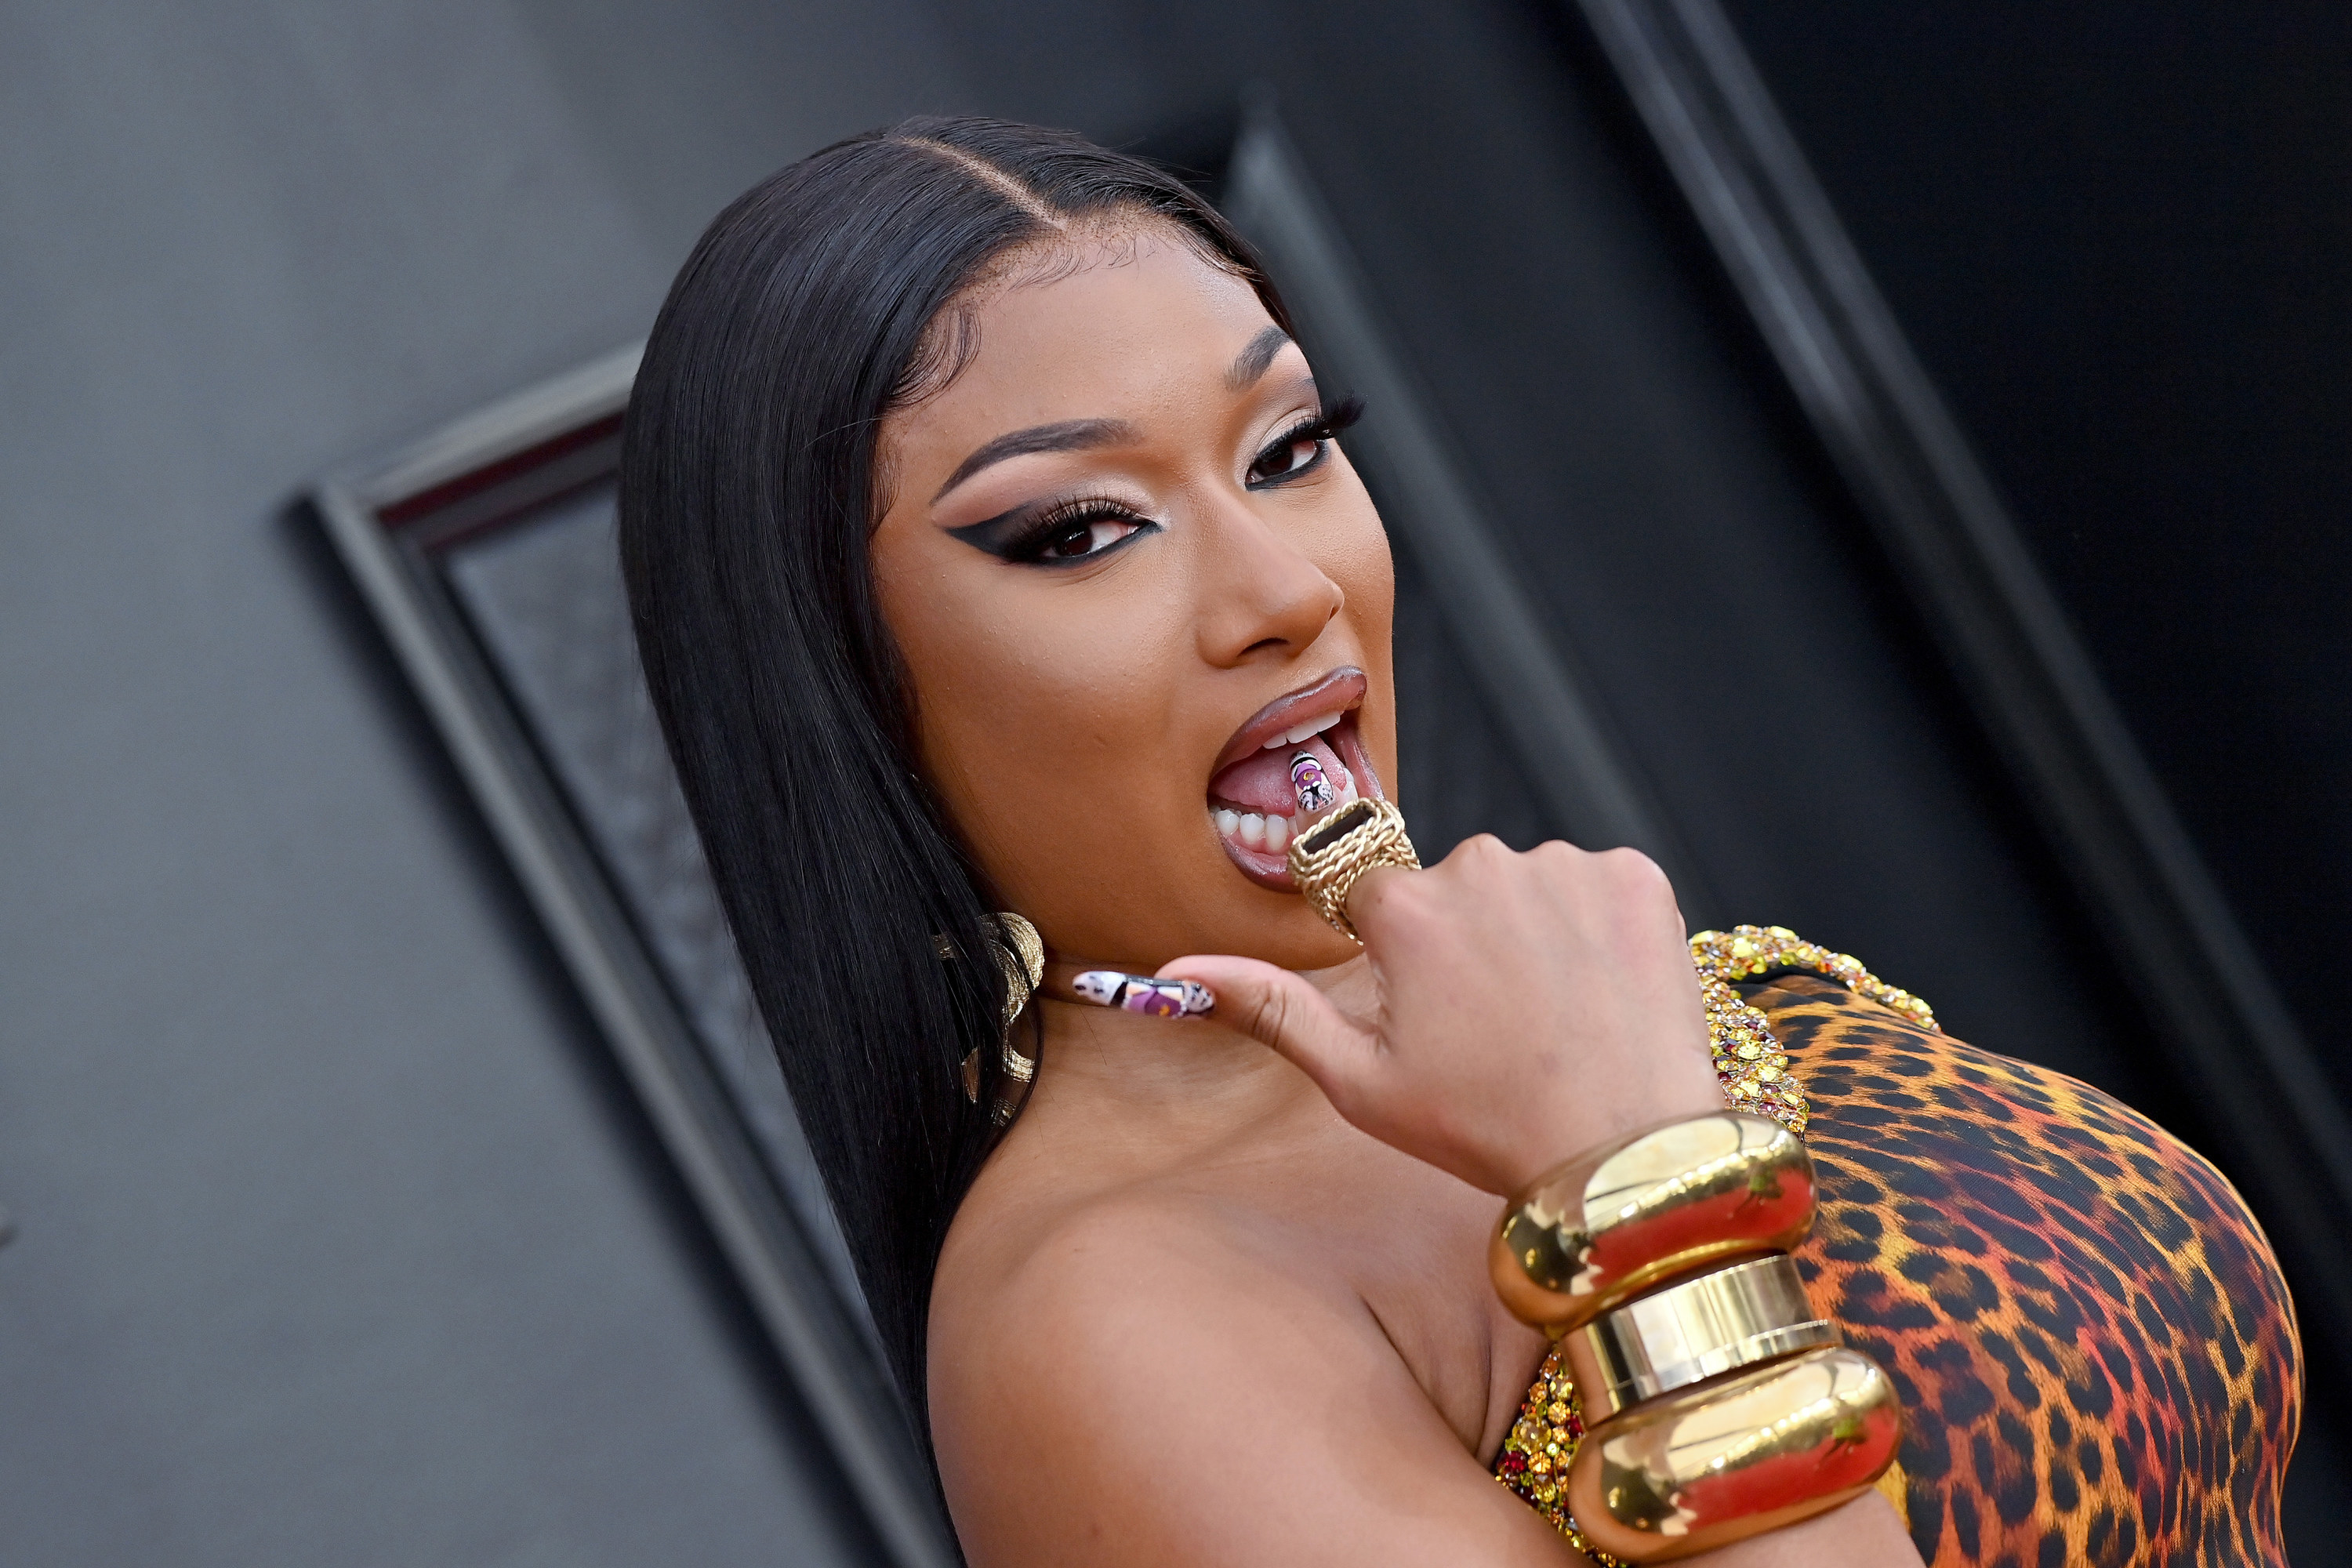 Megan Thee Stallion putting her finger on her tongue